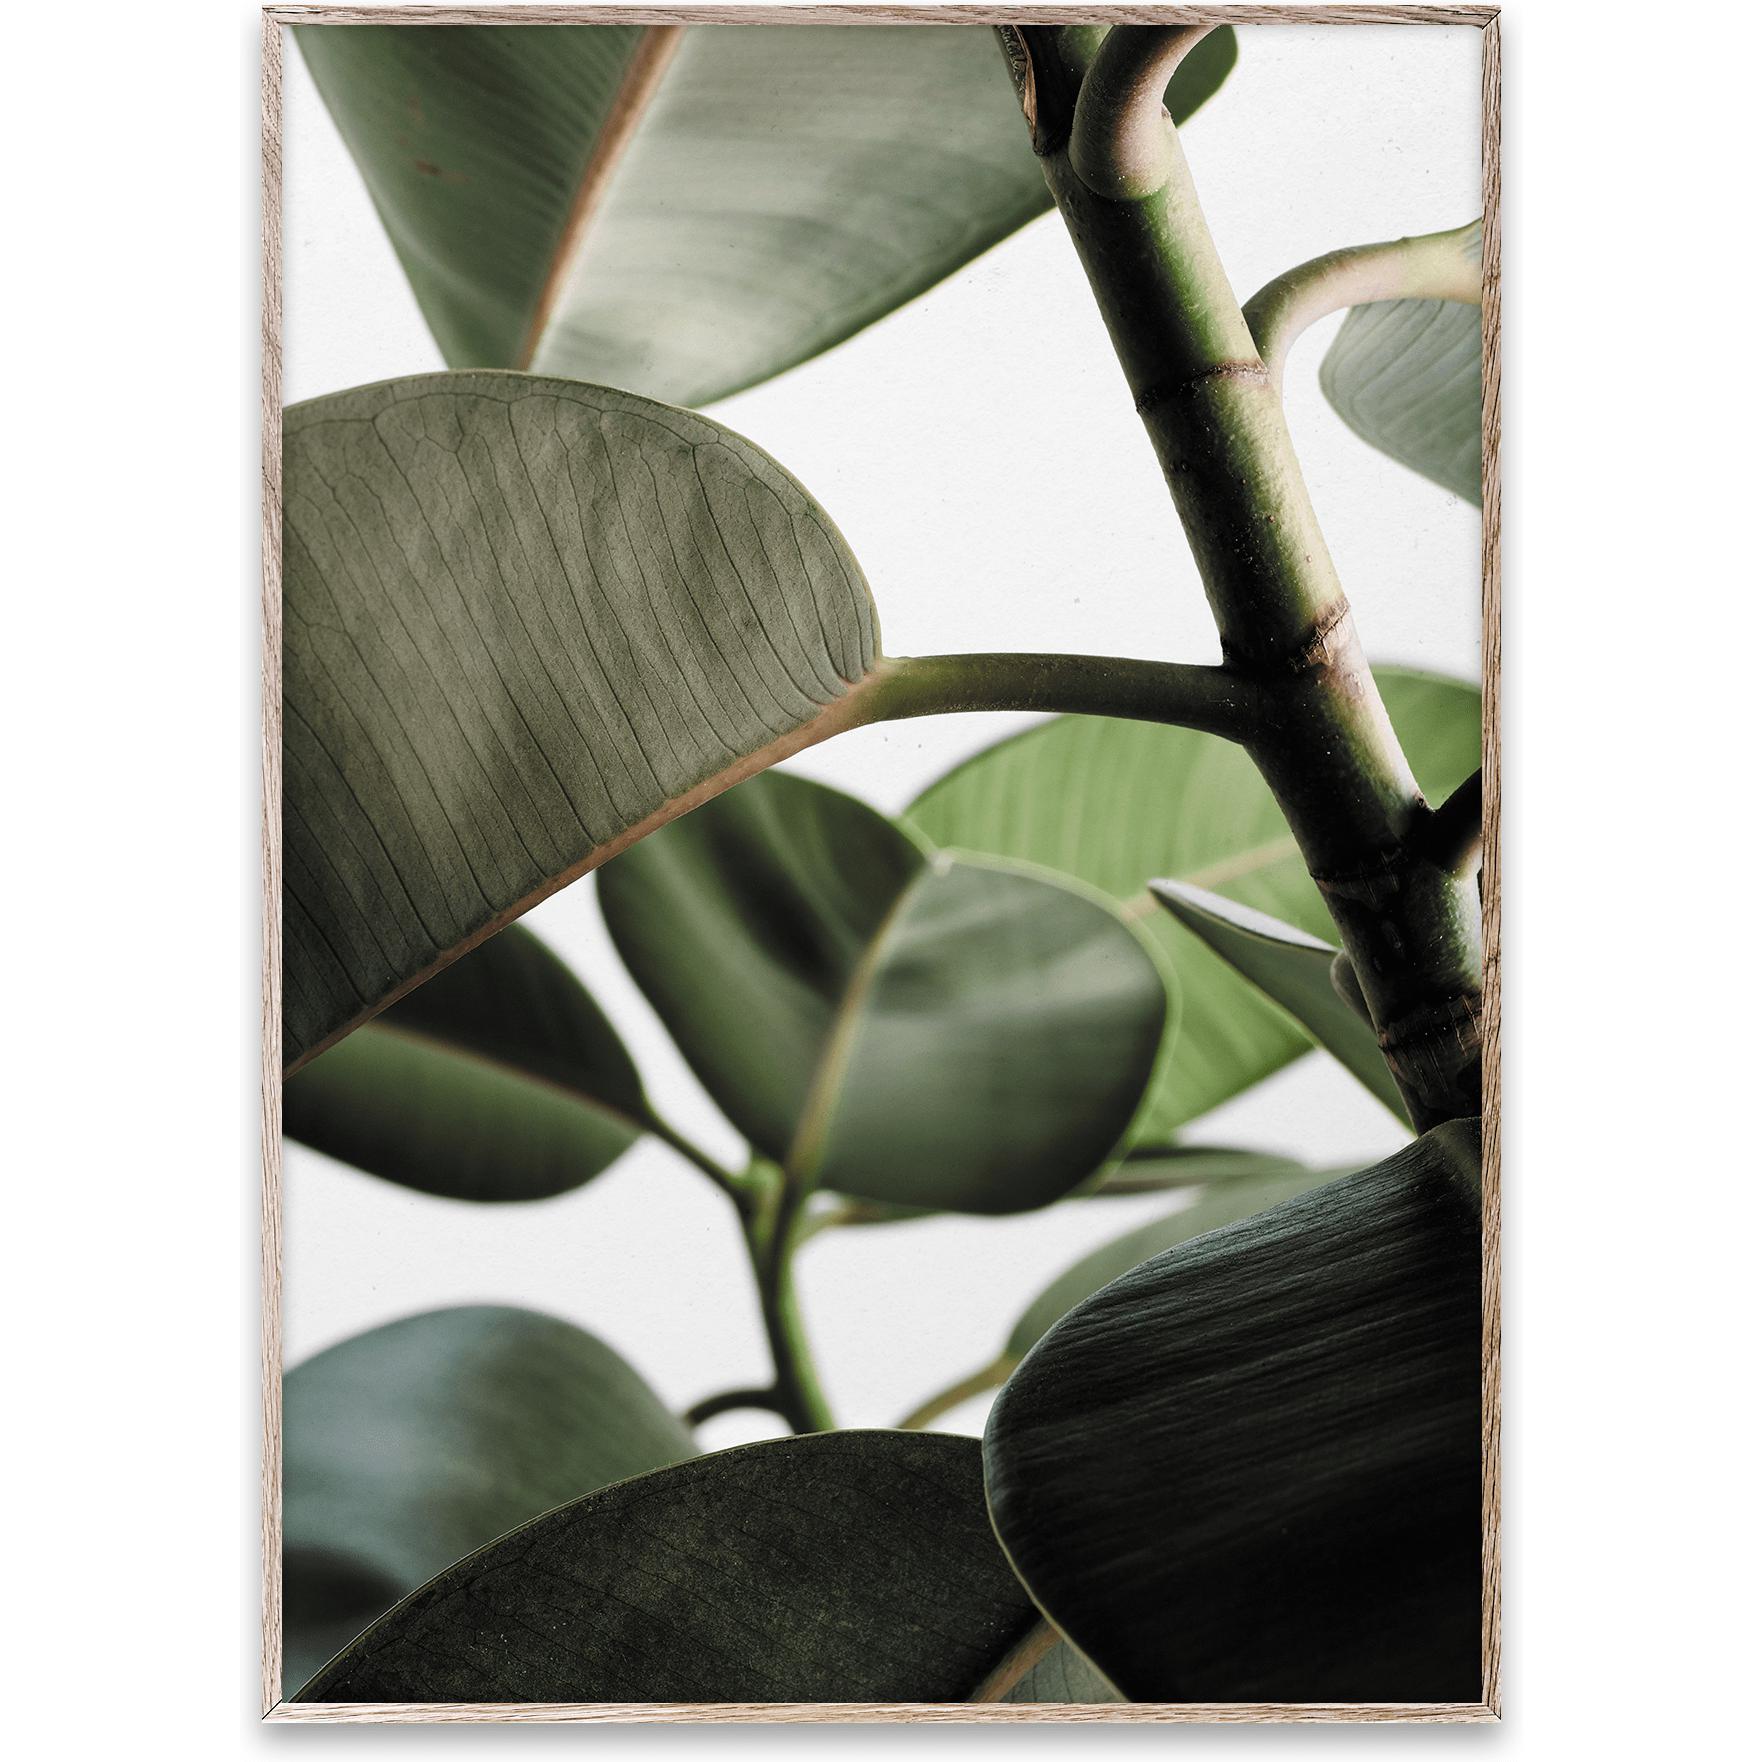 Paper Collective Green Home 03 Affiche, 30x40 cm